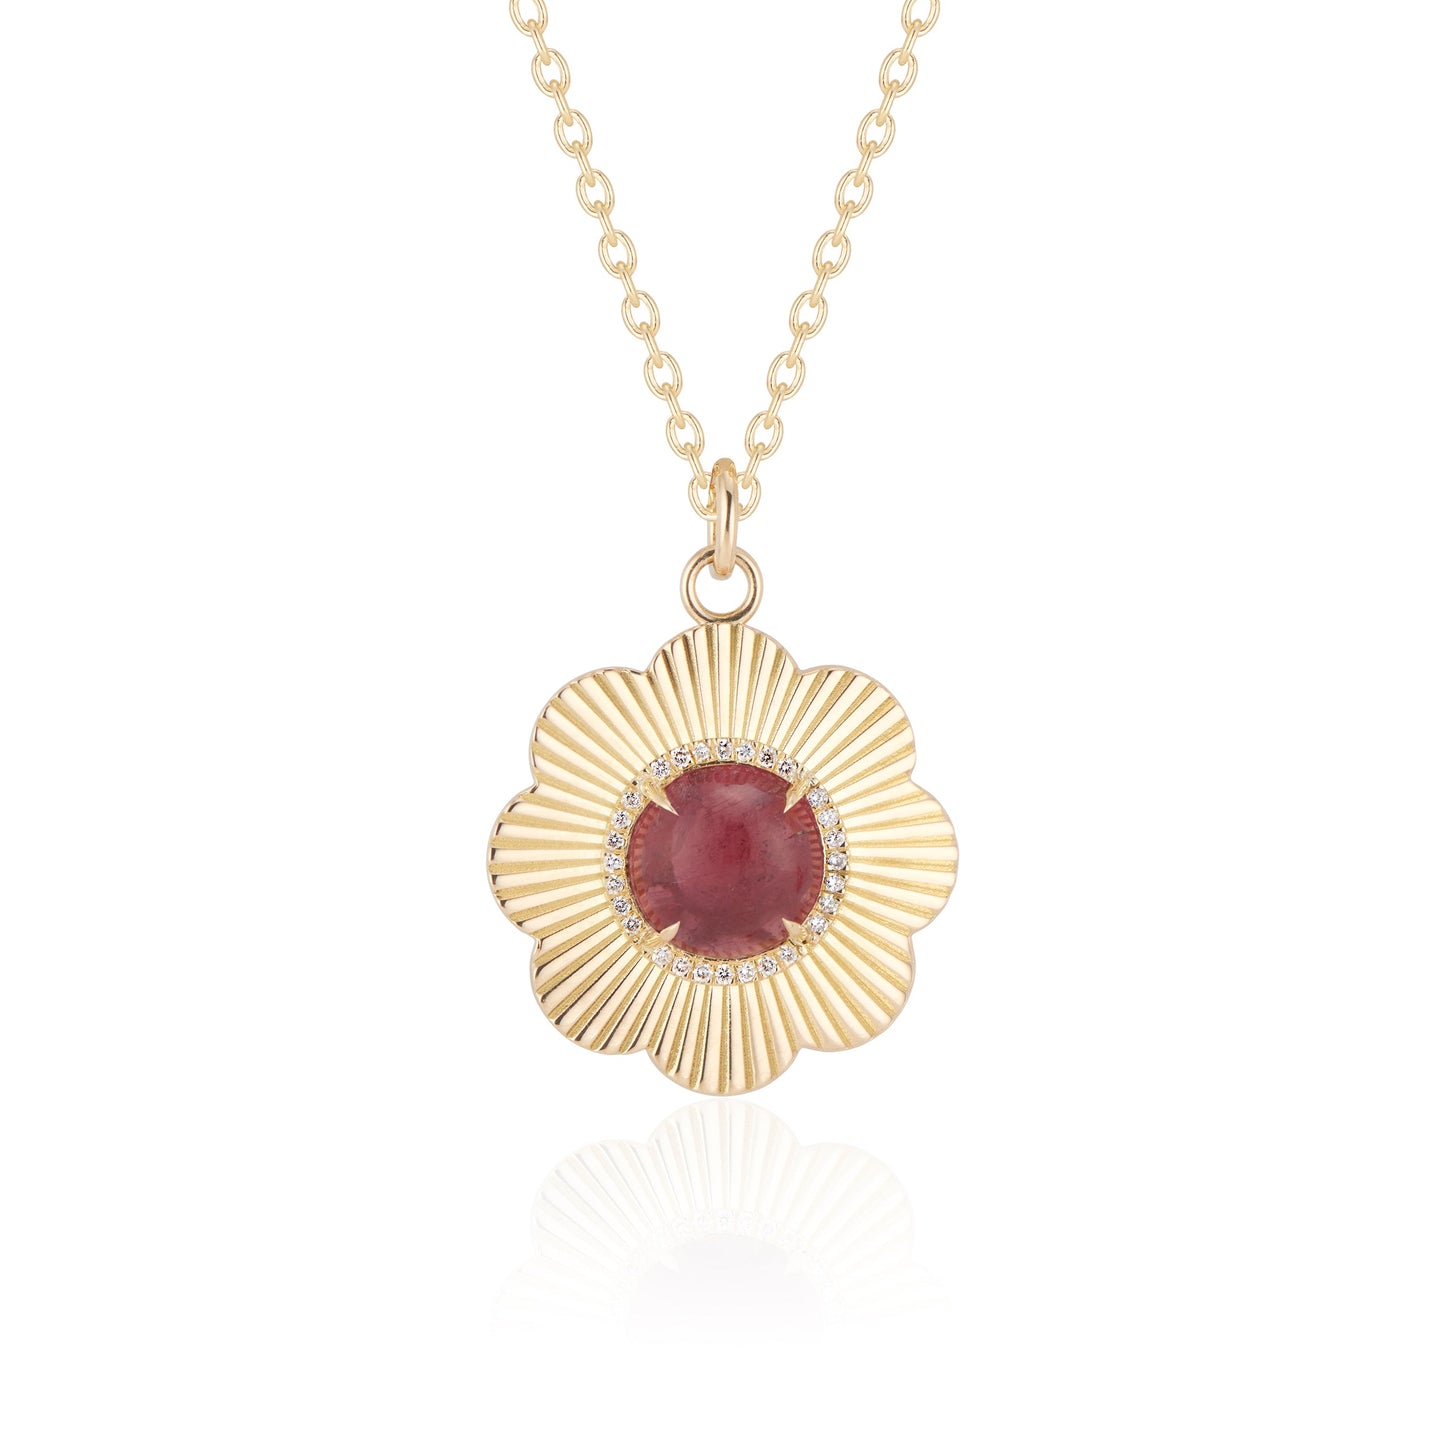 Revival Persephone Pendant Necklace with Rubellite and Diamonds